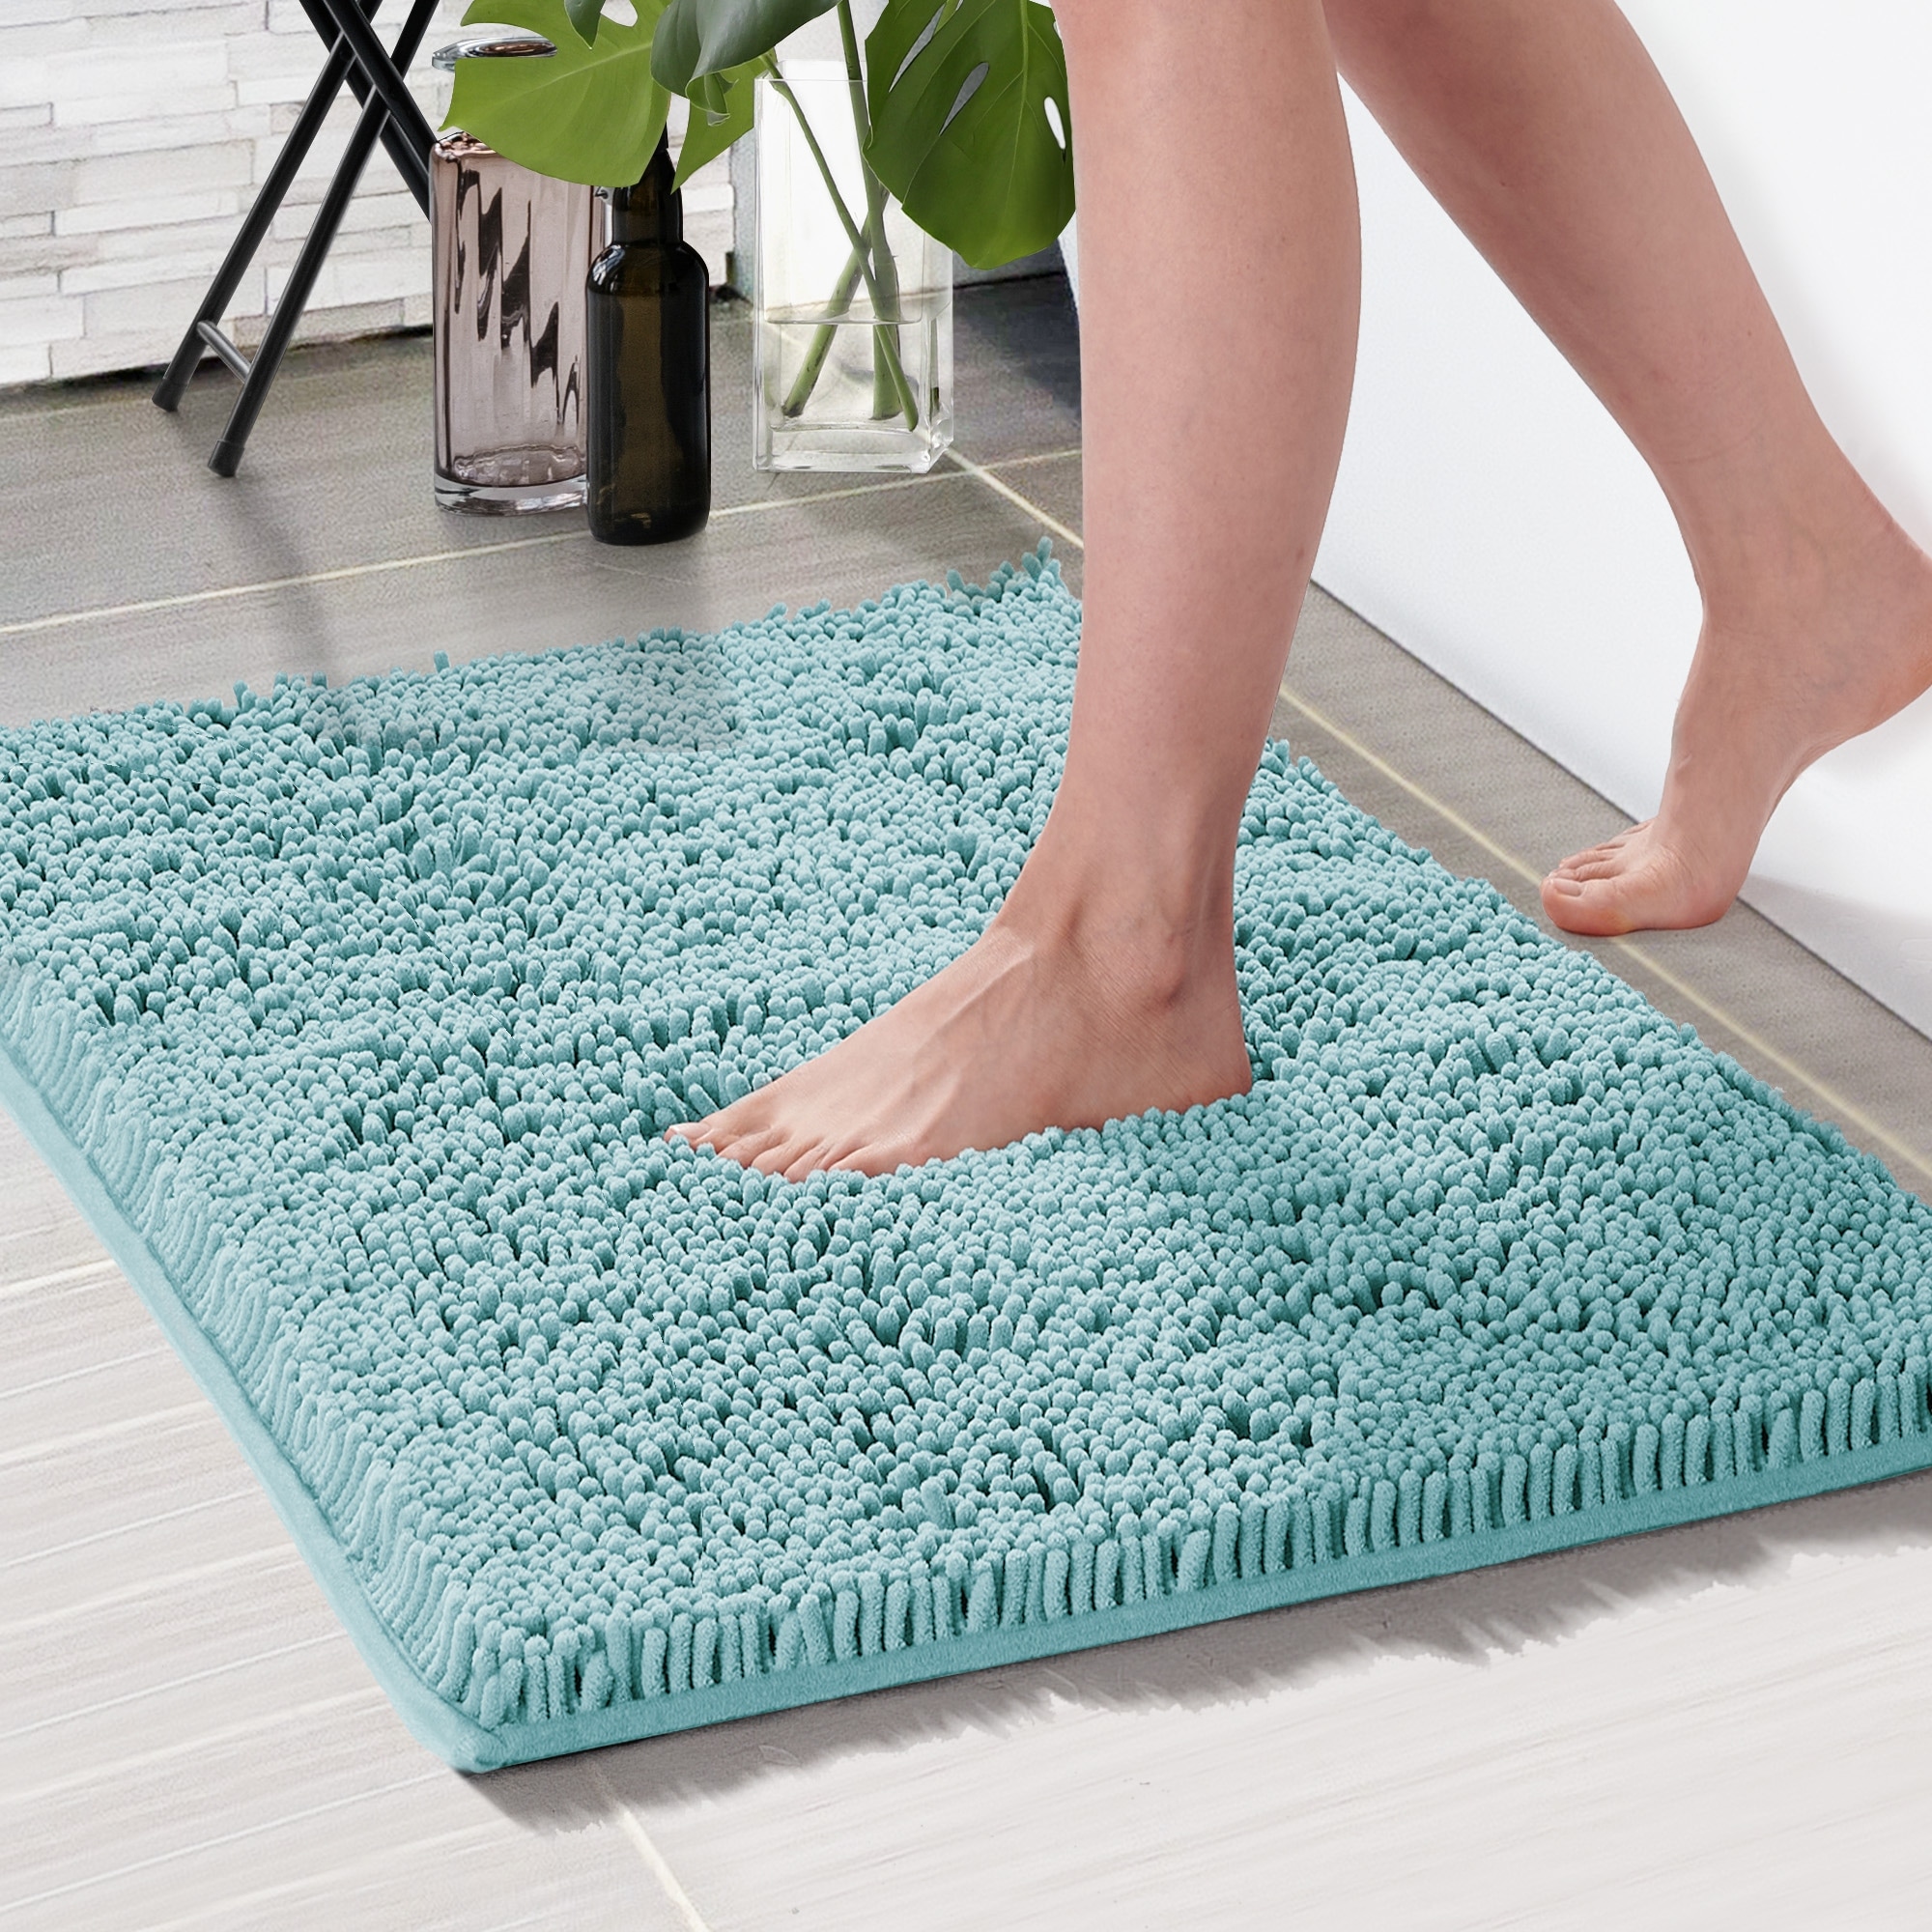 https://ak1.ostkcdn.com/images/products/is/images/direct/0fc63d5d2d1df9955bf031481c1adf3ef8401ac9/Deconovo-Plush-Absorbent-Thick-Chenille-Bath-Rugs-%281-PC%29.jpg